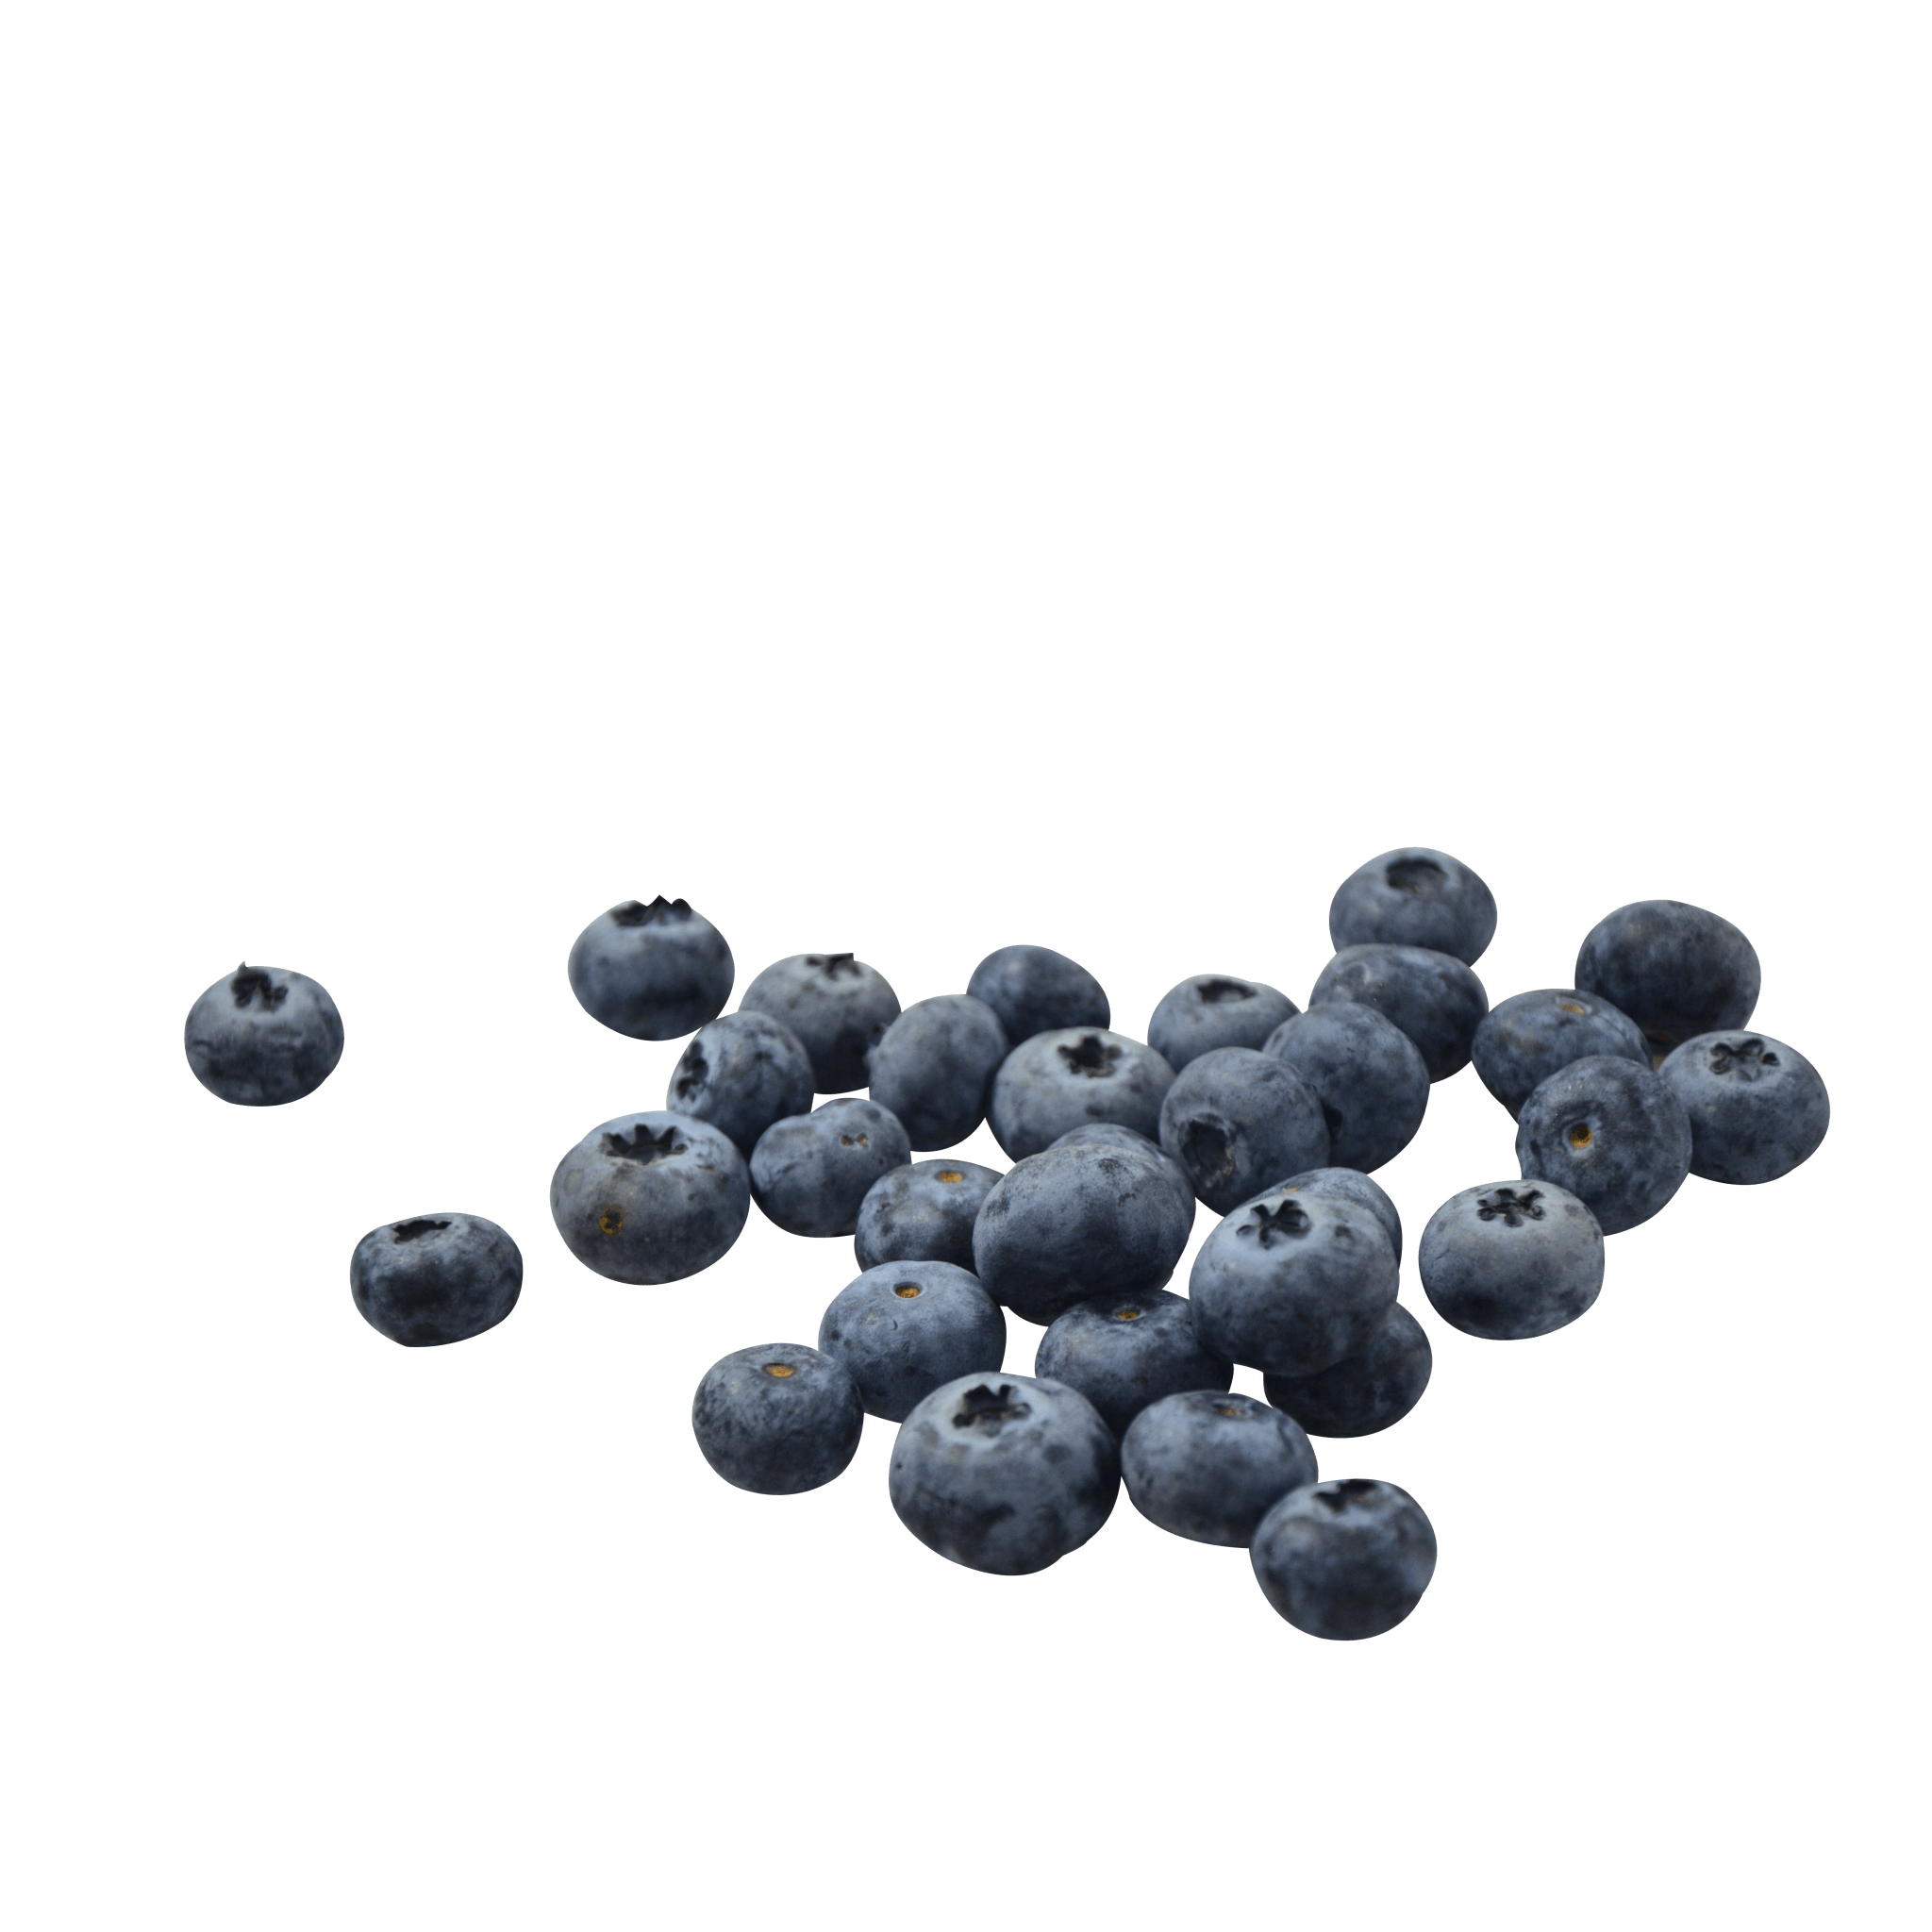 This is a picture of some blueberries with a transparent background